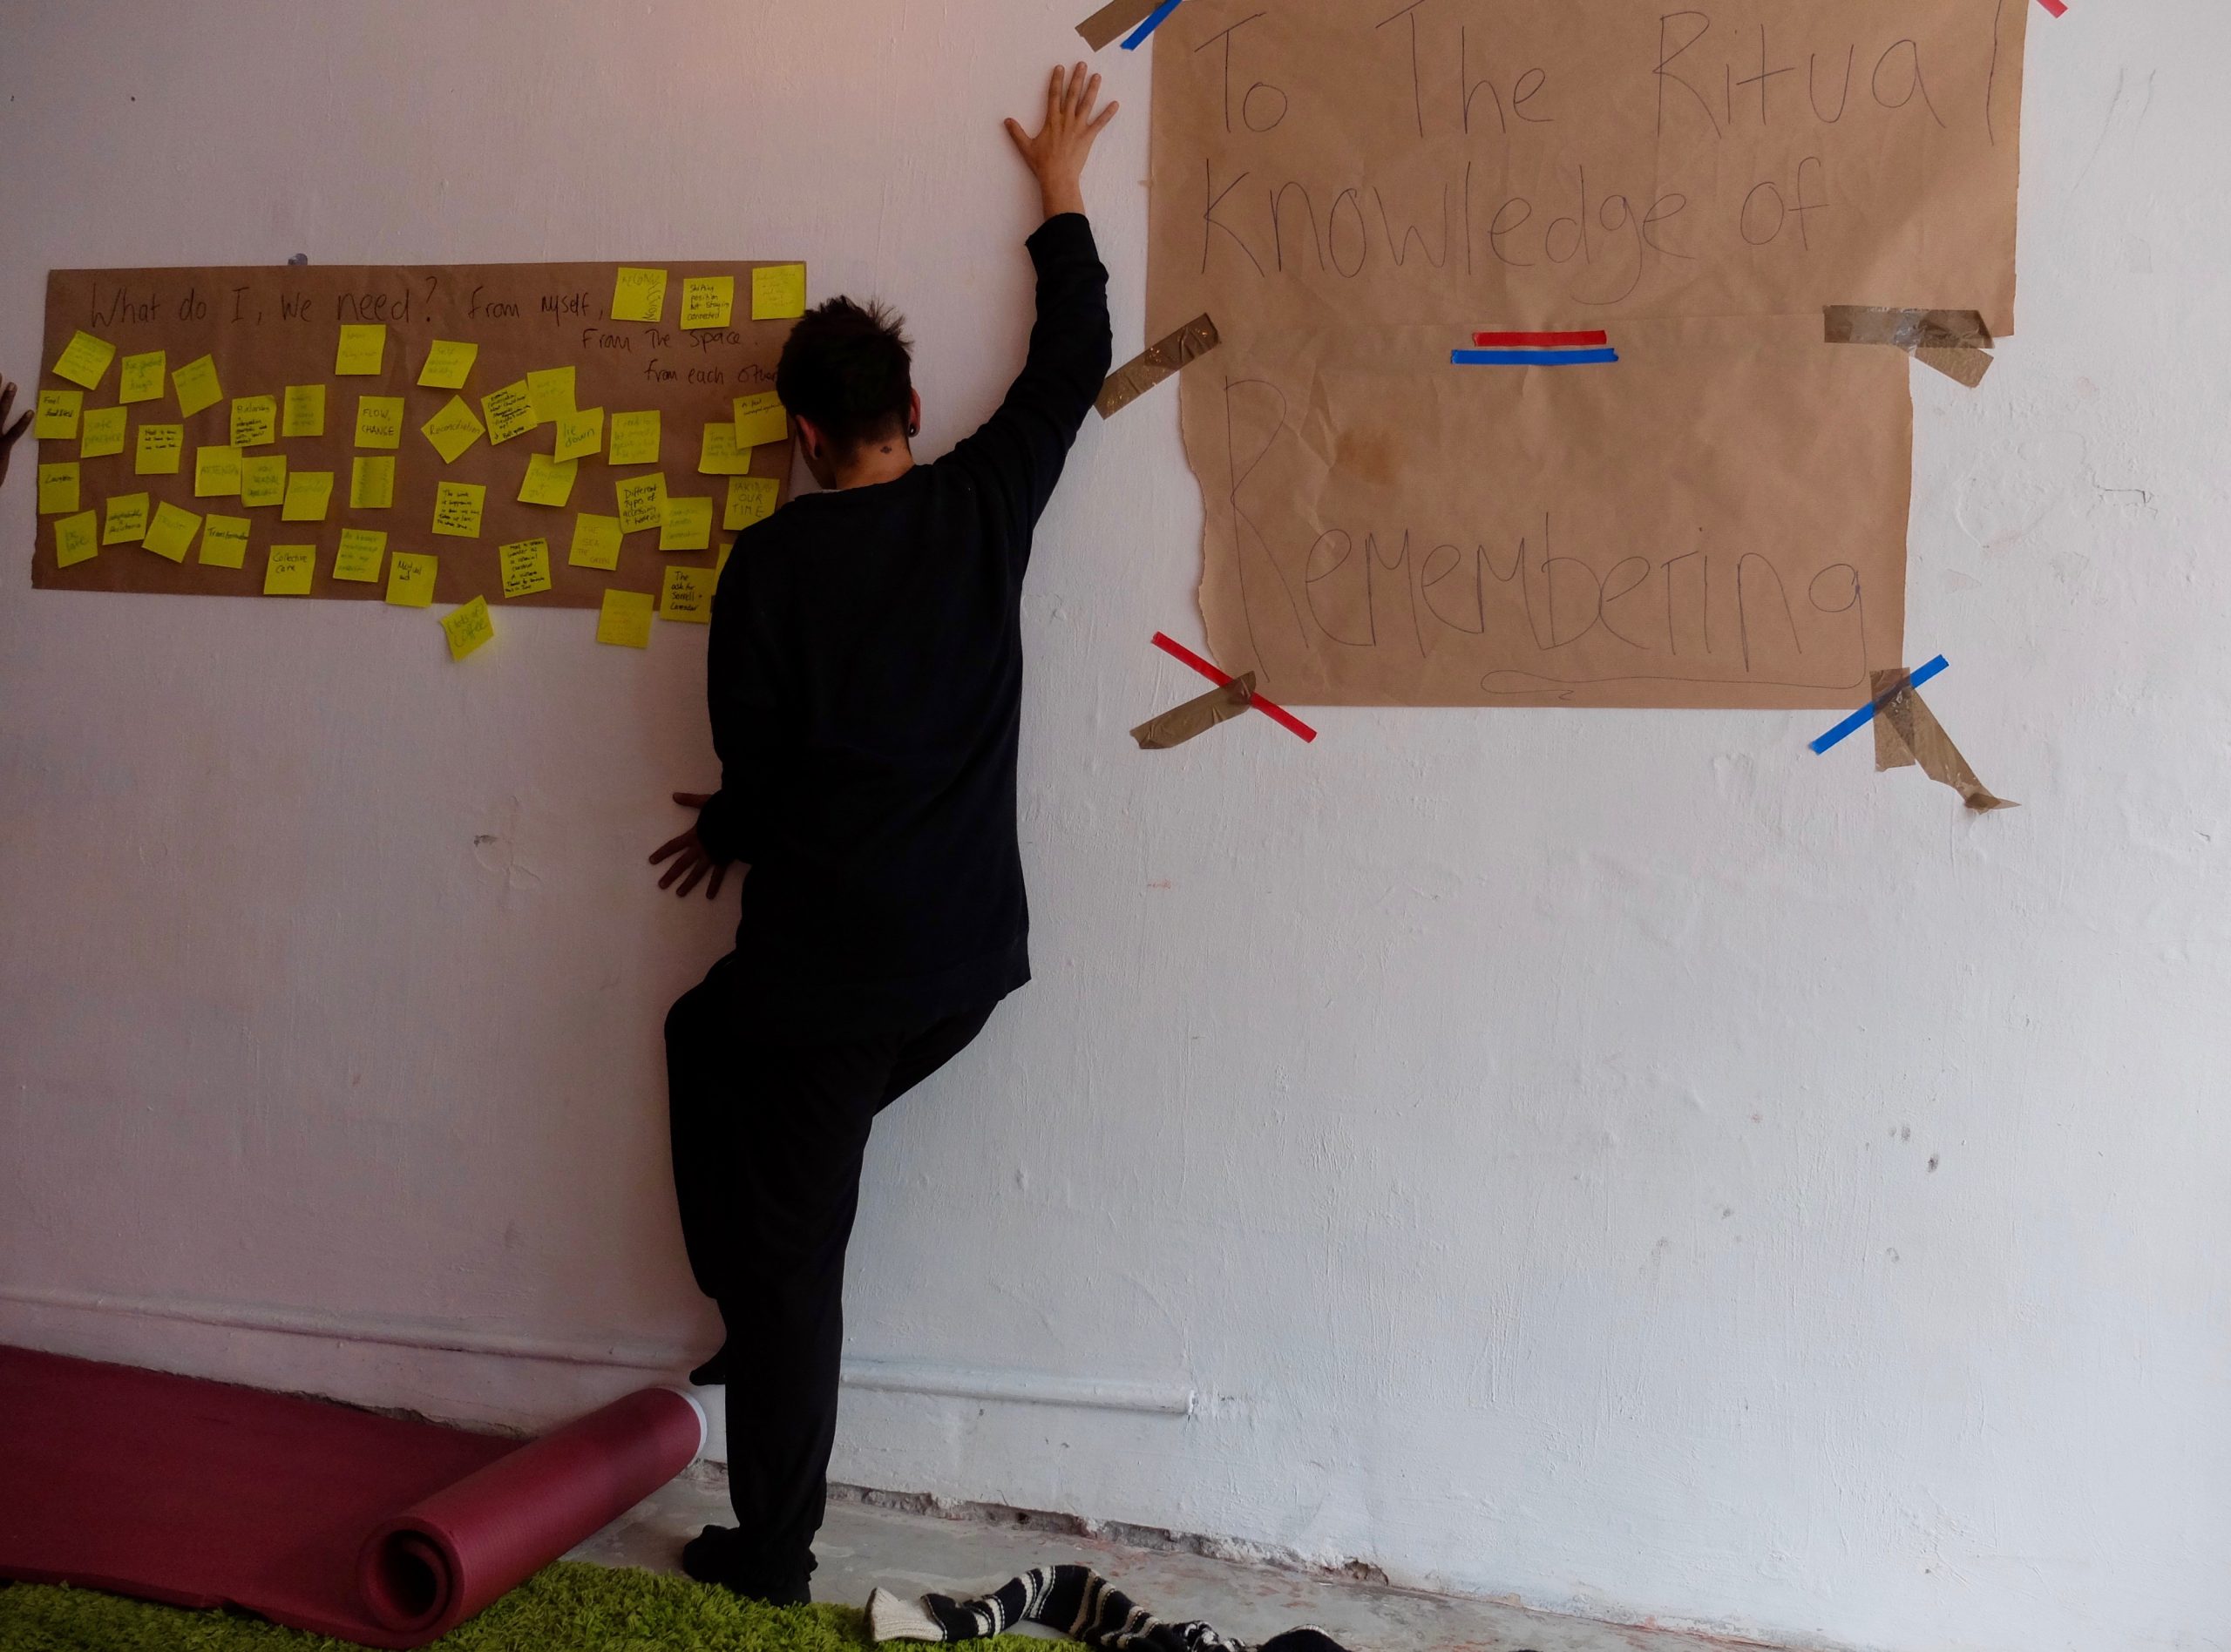 A workshop participant presses their body against a wall. Attached to the wall are various post it notes and paper sheets.